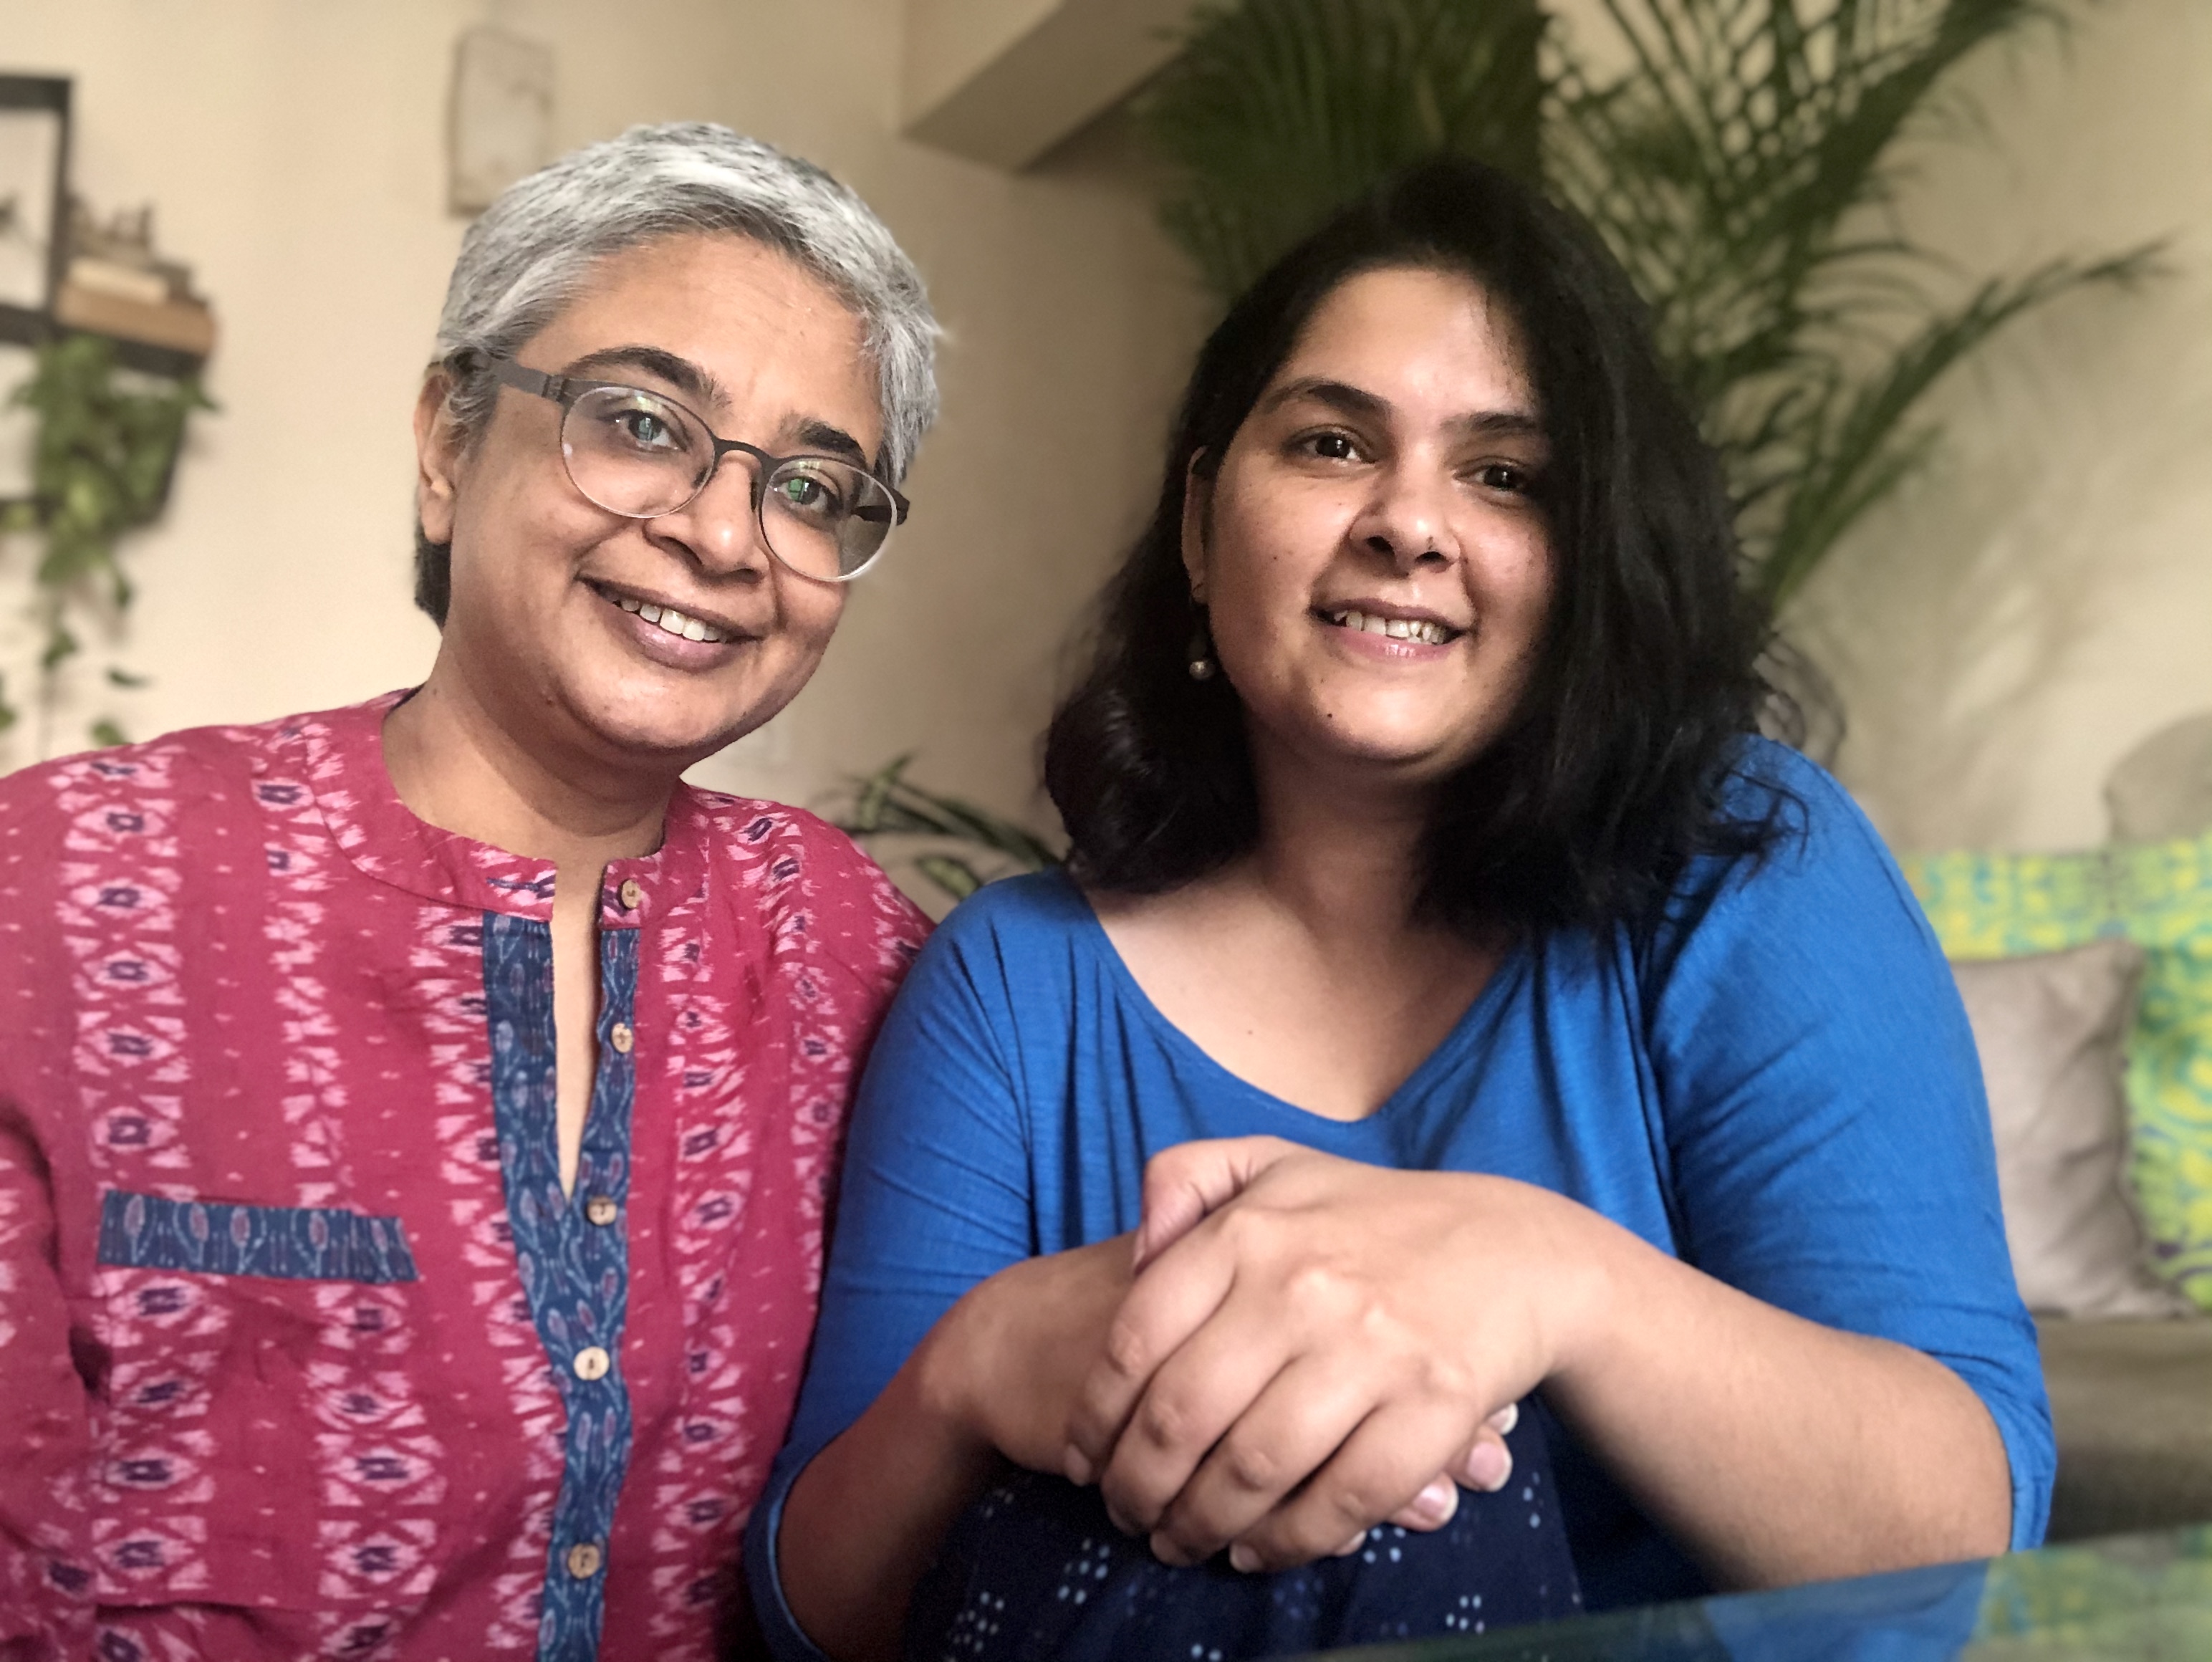 Is India Ready to Legalize LGBTQ Marriage? Time